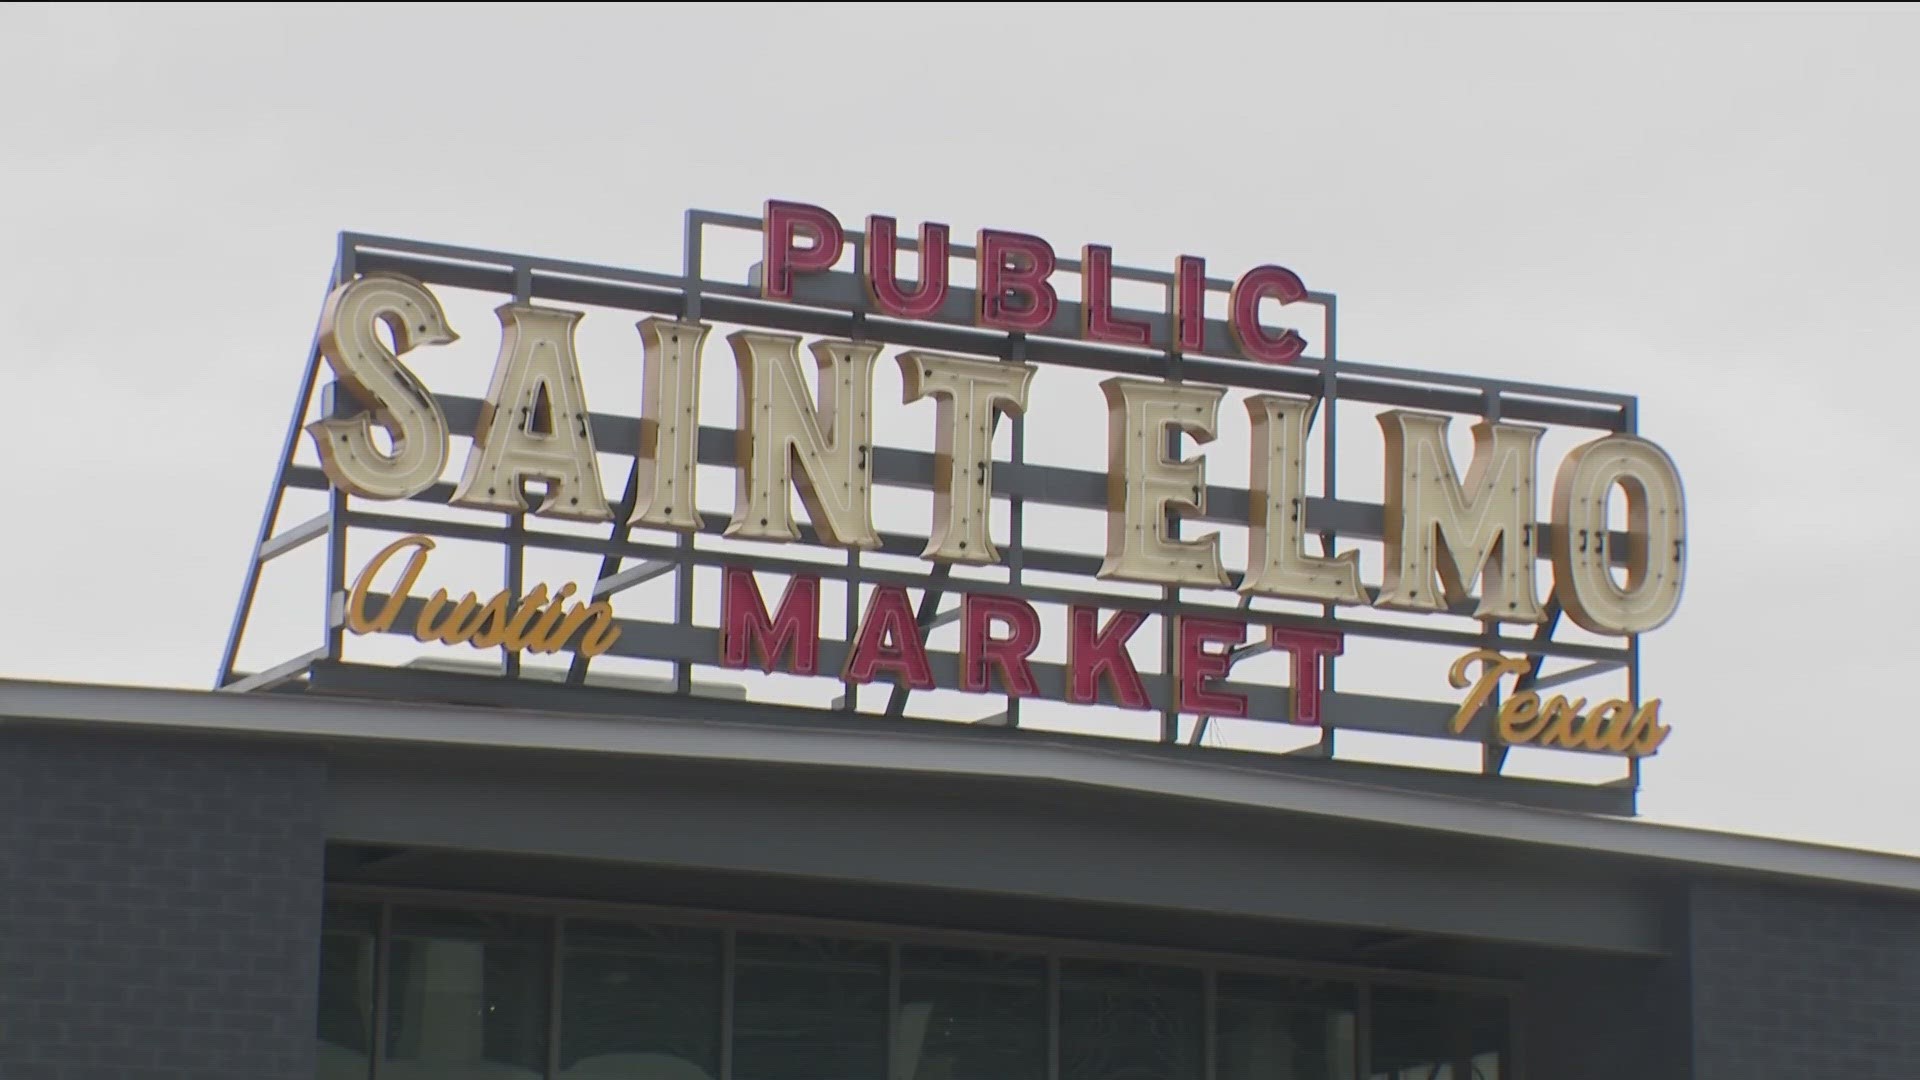 Plans are changing at the site of an old bus terminal along South Congress Avenue. What was supposed to become St. Elmo Public Market has been sitting empty.